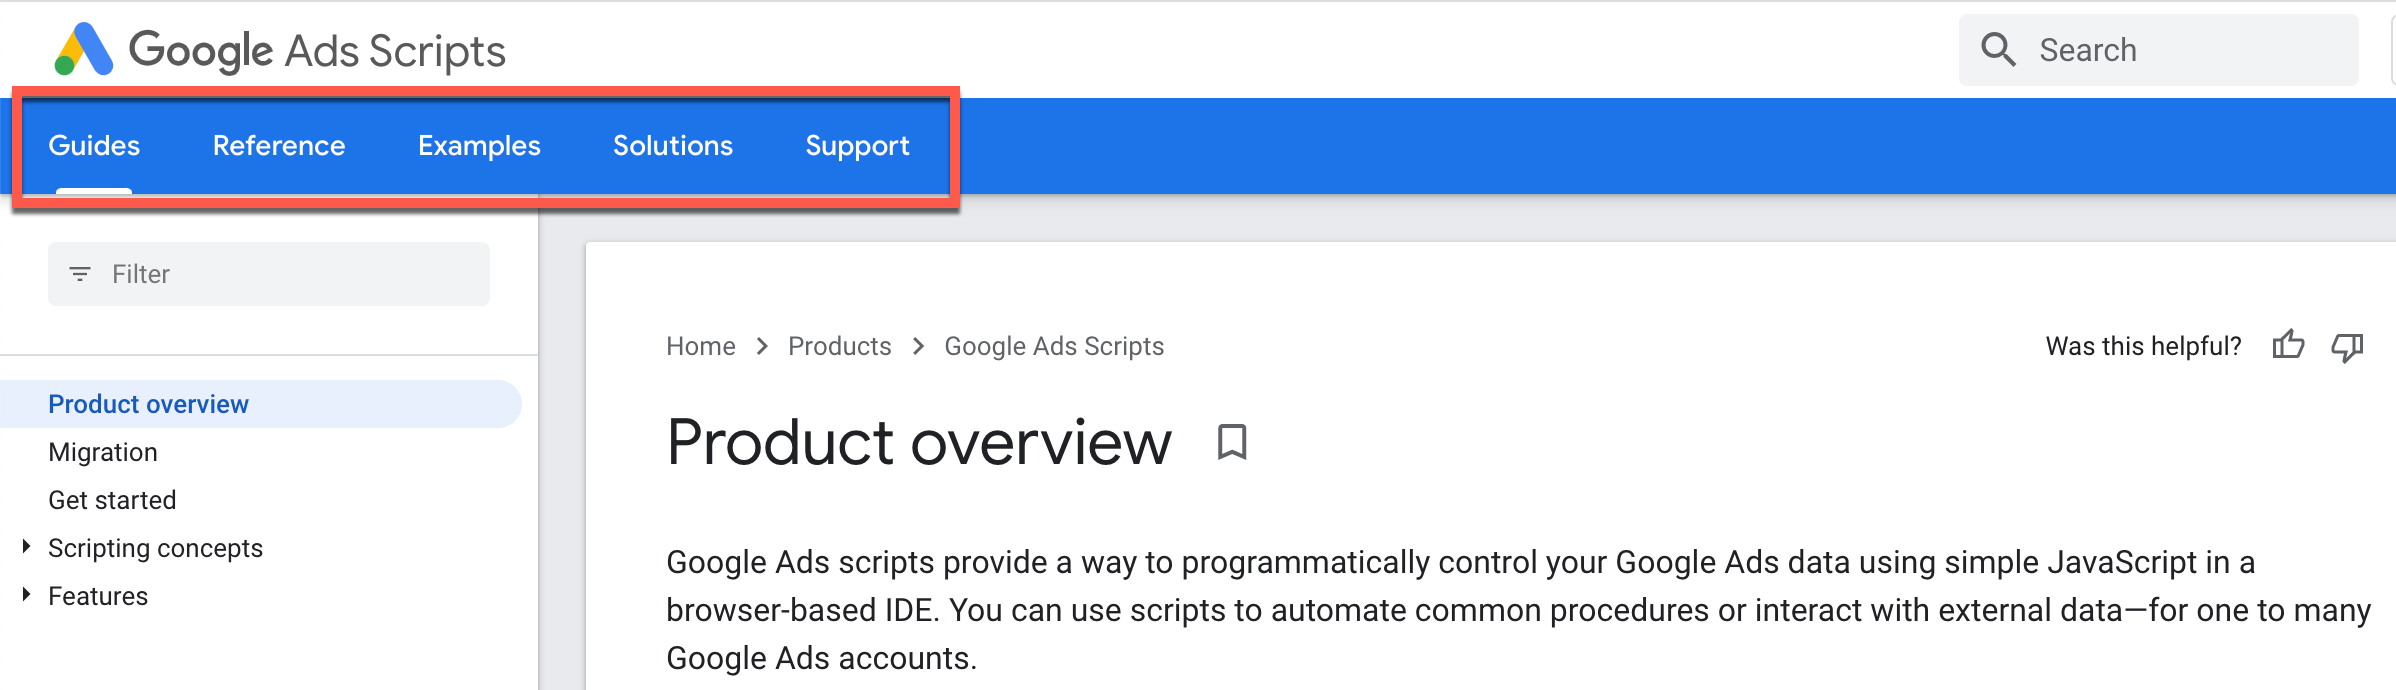 sections on google ads scripts pages